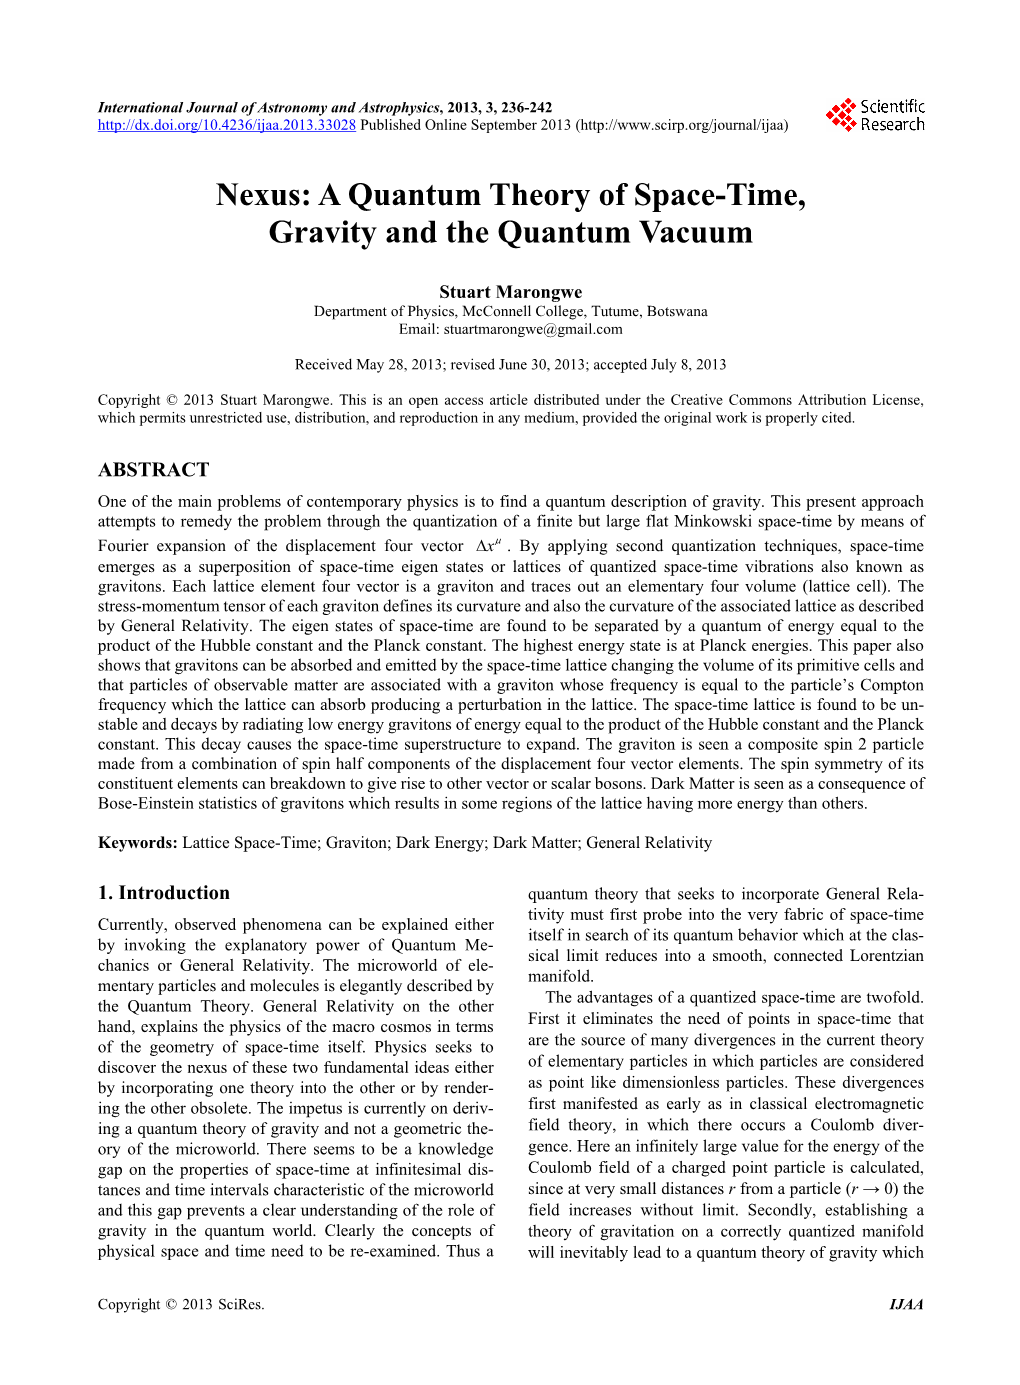 A Quantum Theory of Space-Time, Gravity and the Quantum Vacuum